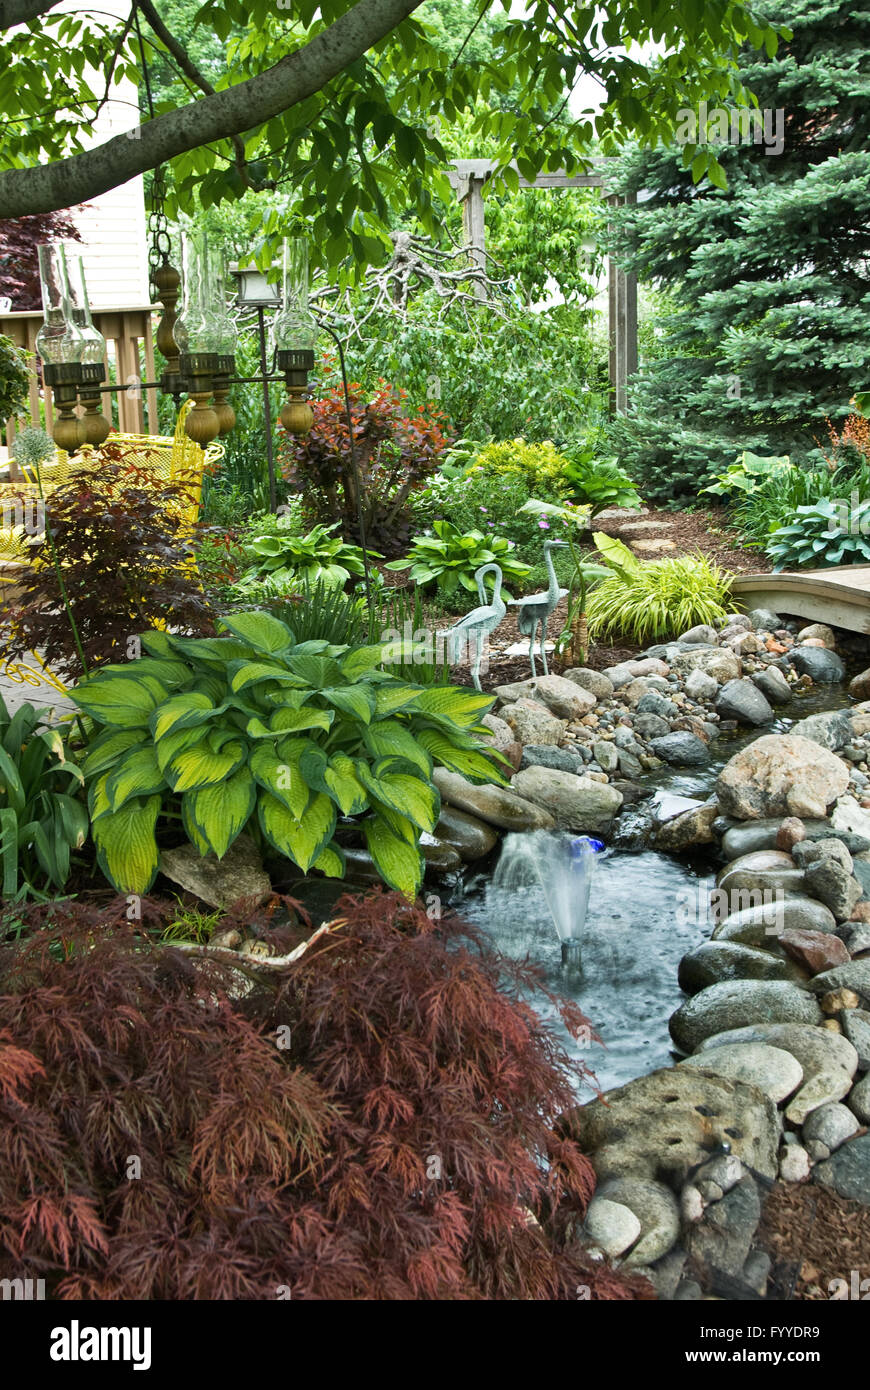 Garden with water feature and plants, hosta, Japanese maple, ornaments, bridge, Stock Photo